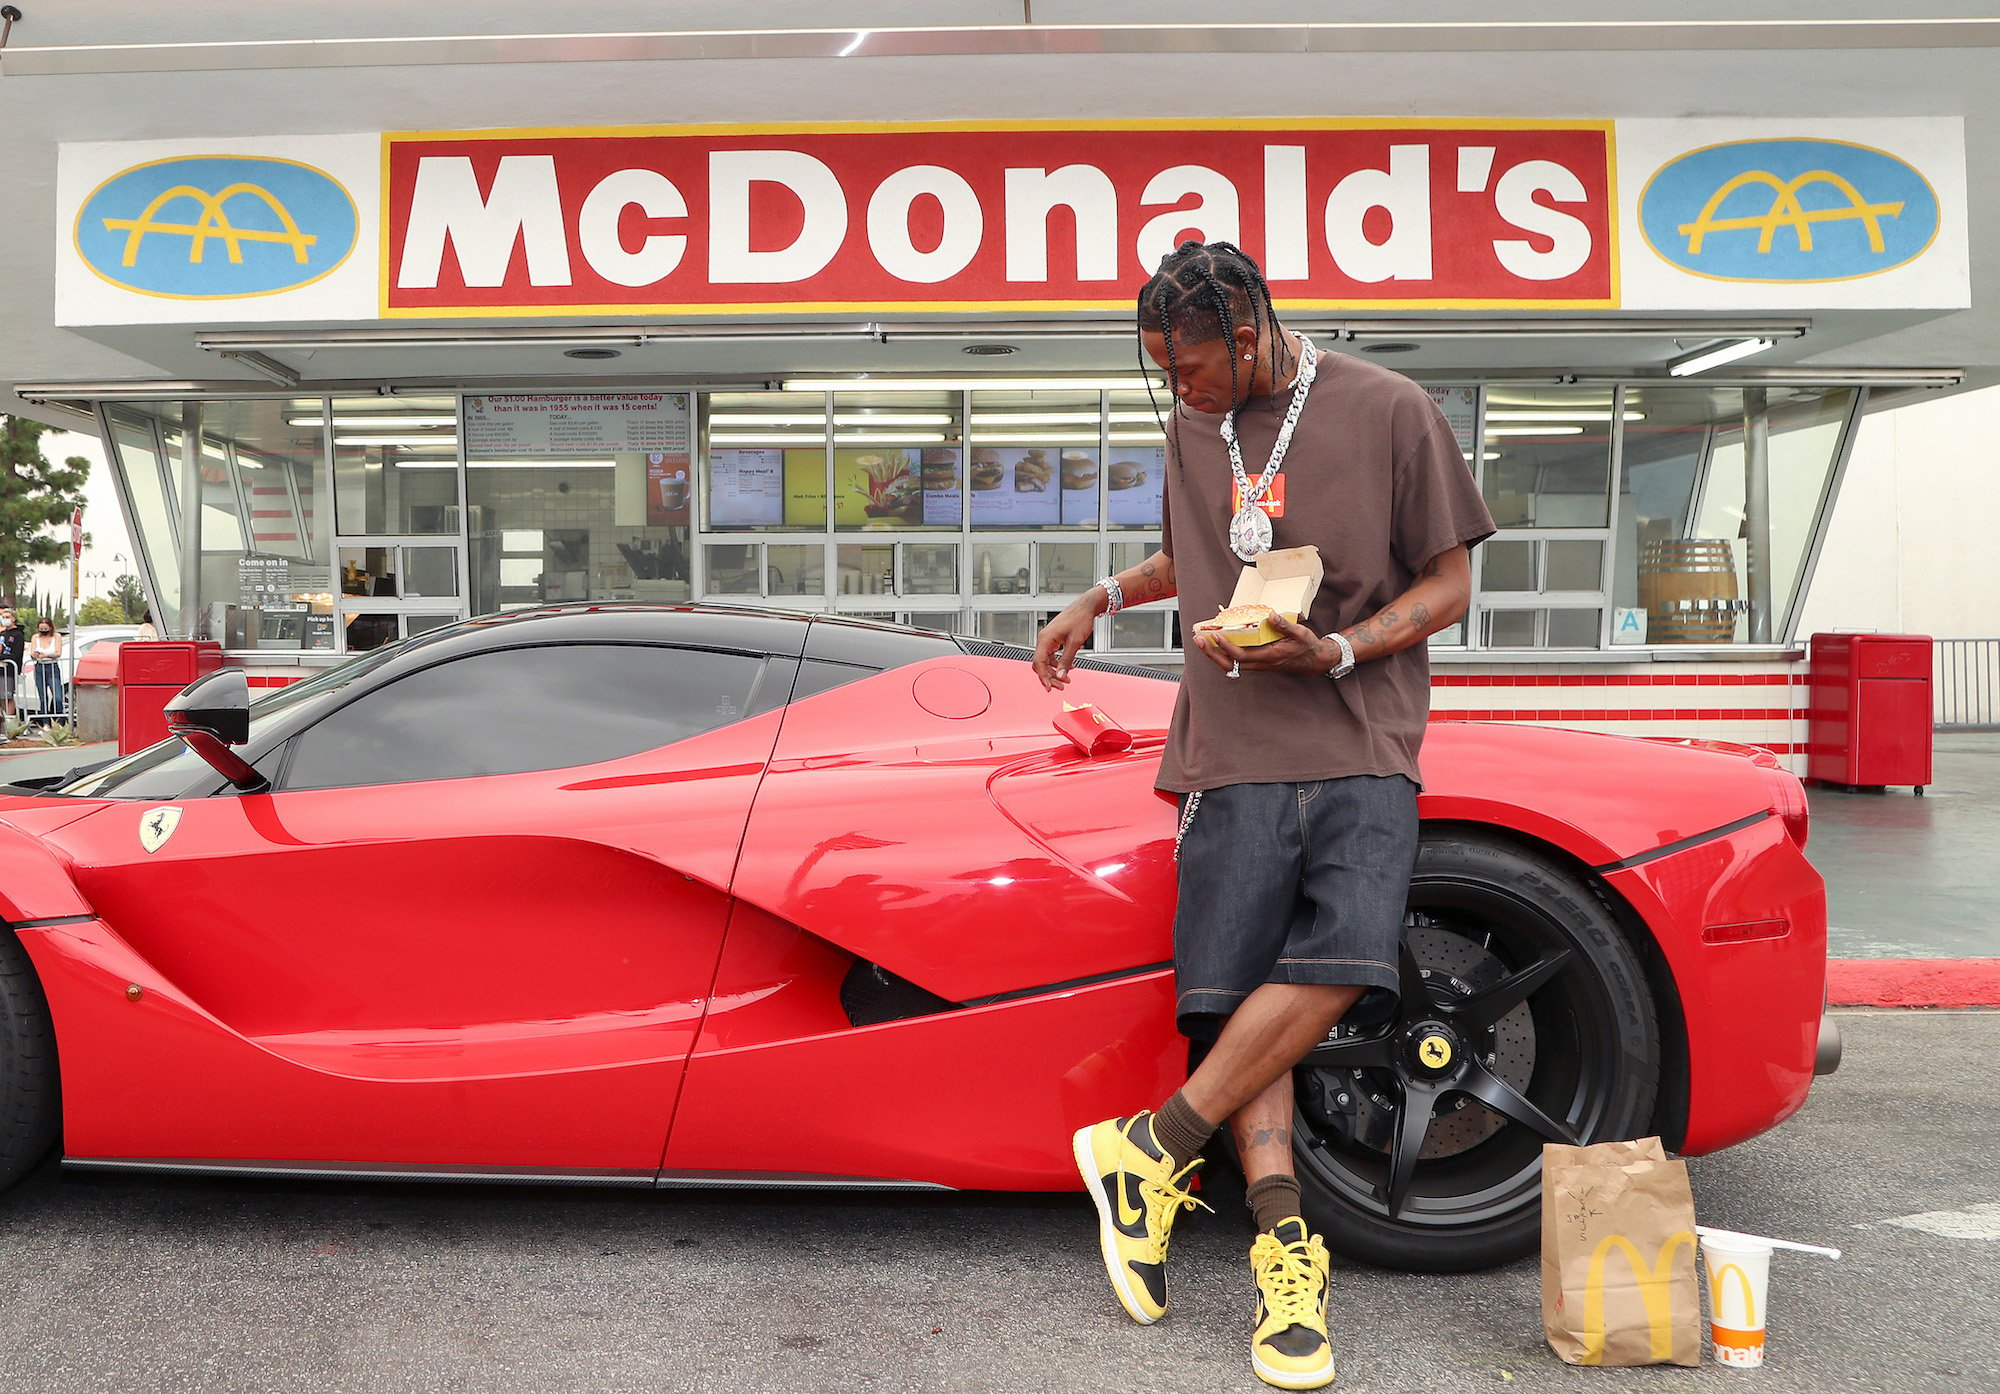 Travis Scott leaning against a red car in front of a McDonald's